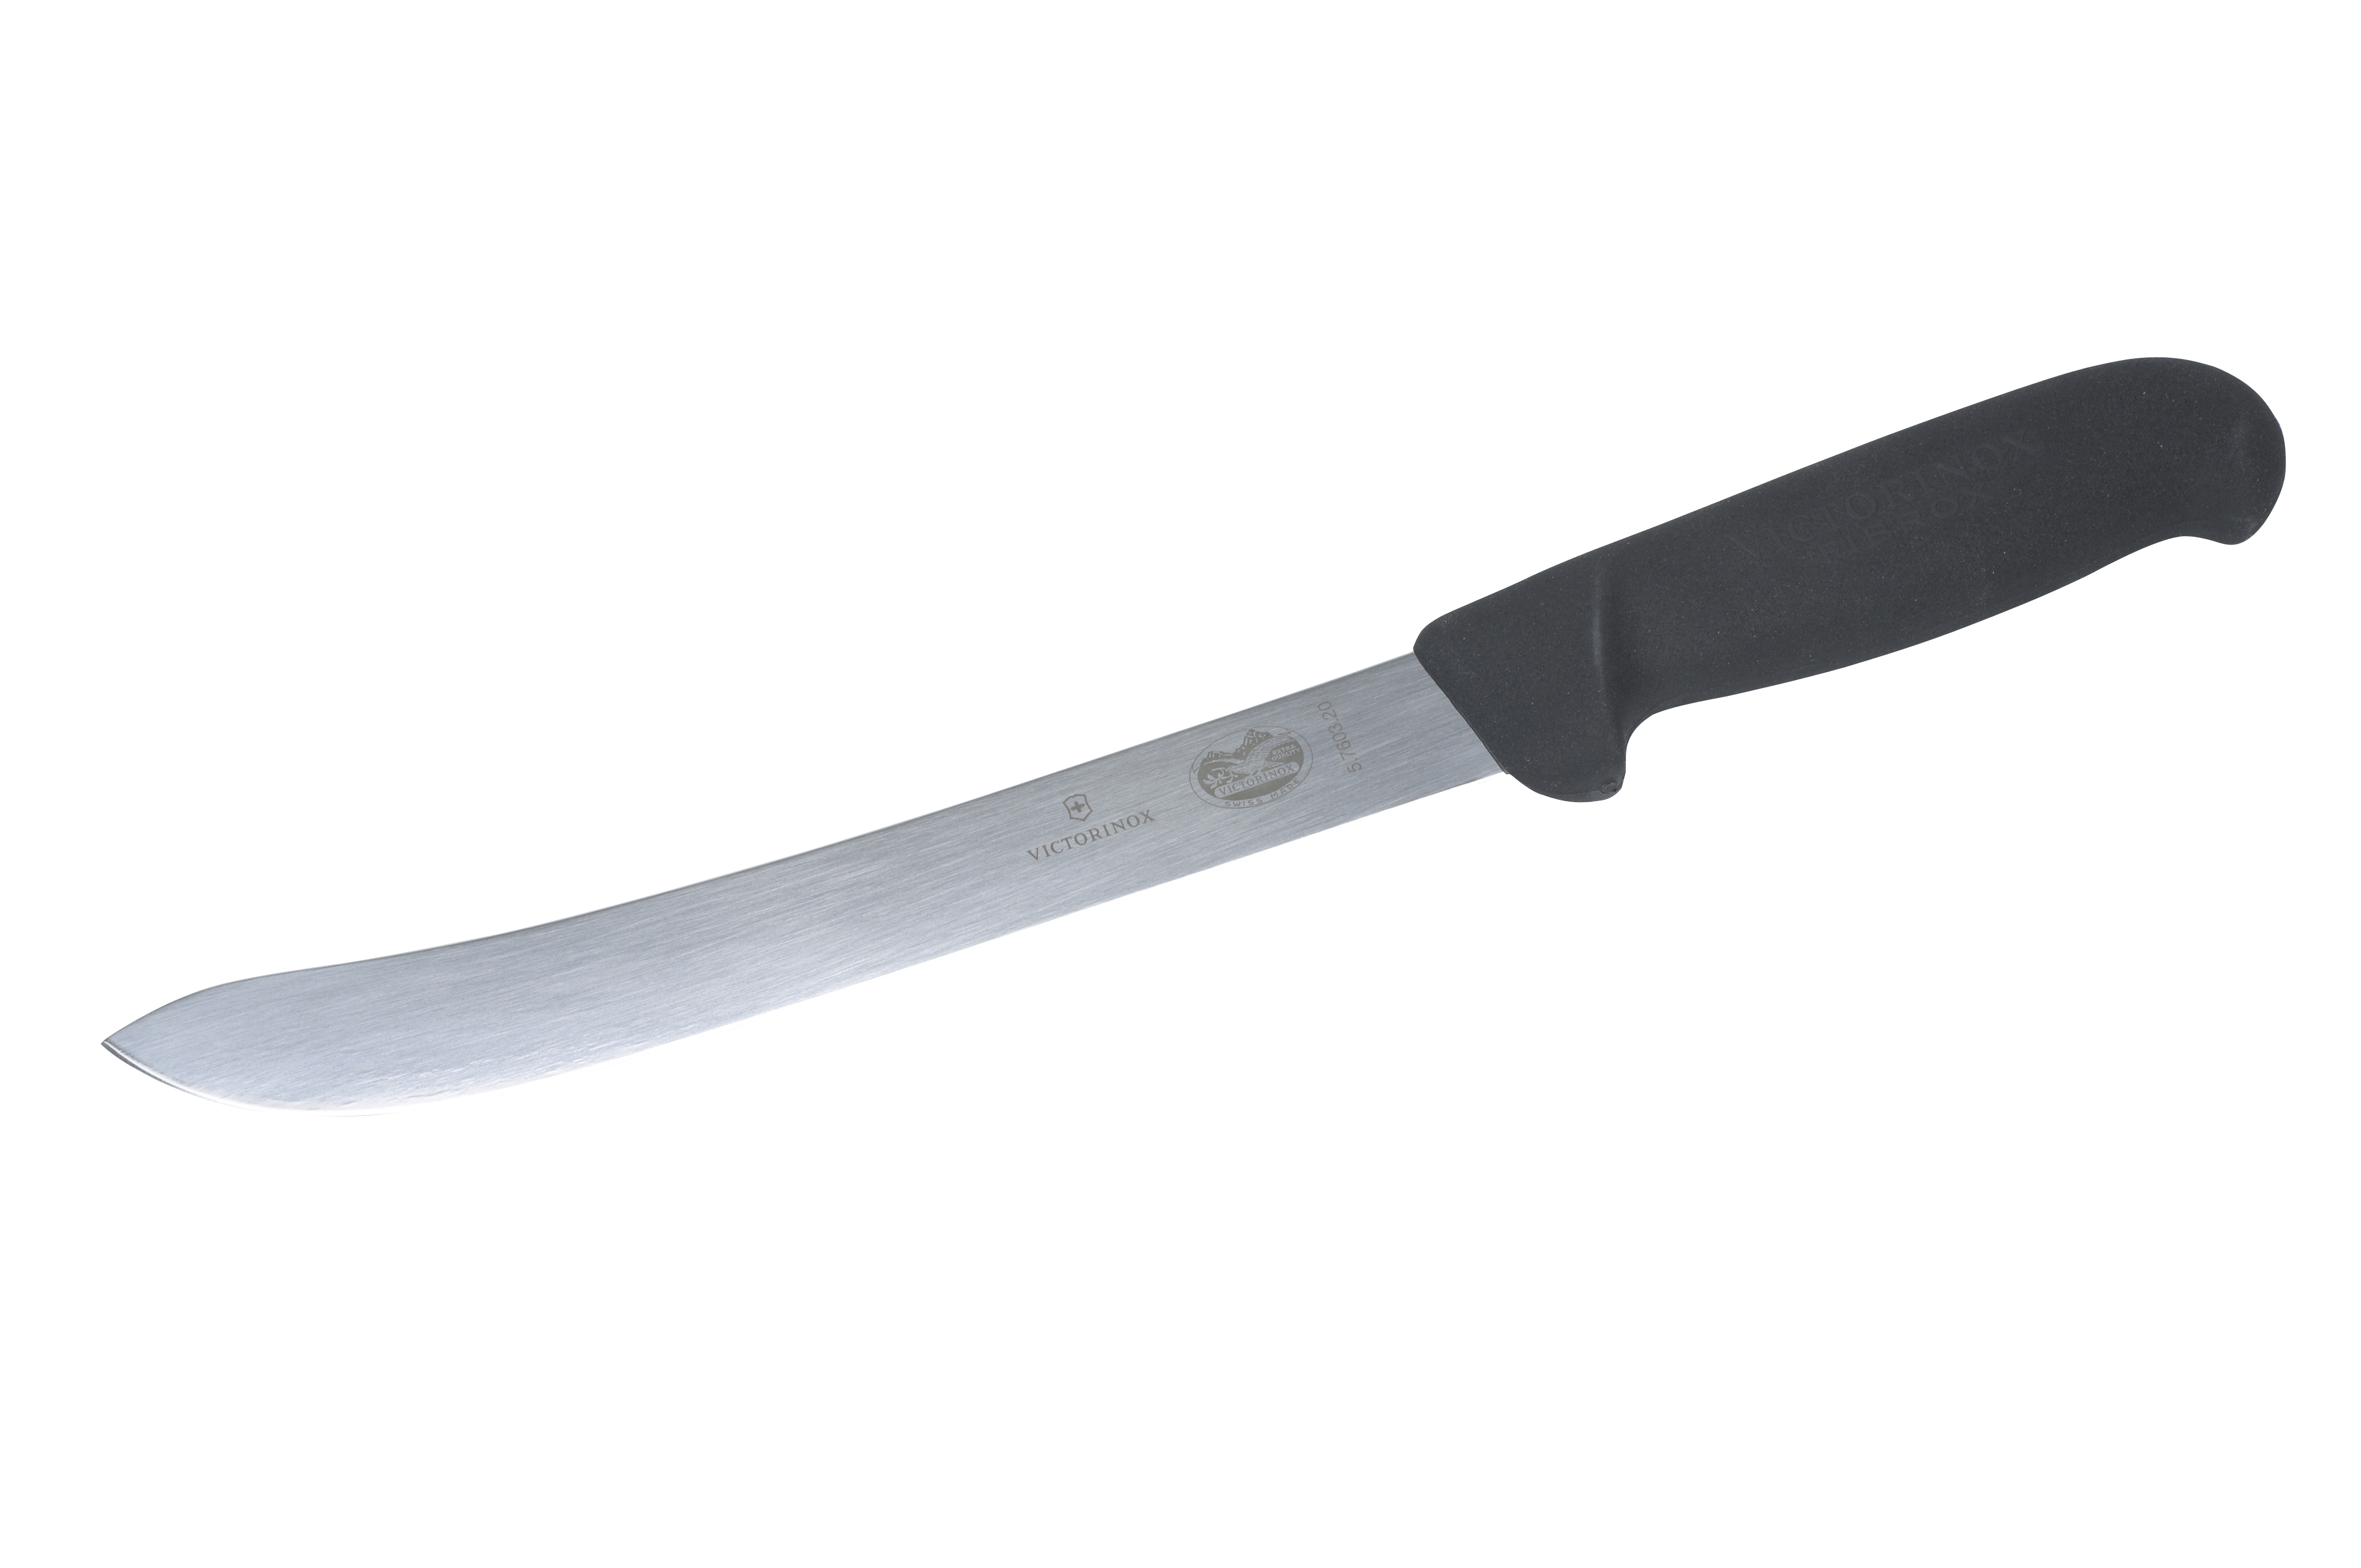 Autopsy knife 21.5 cm curved